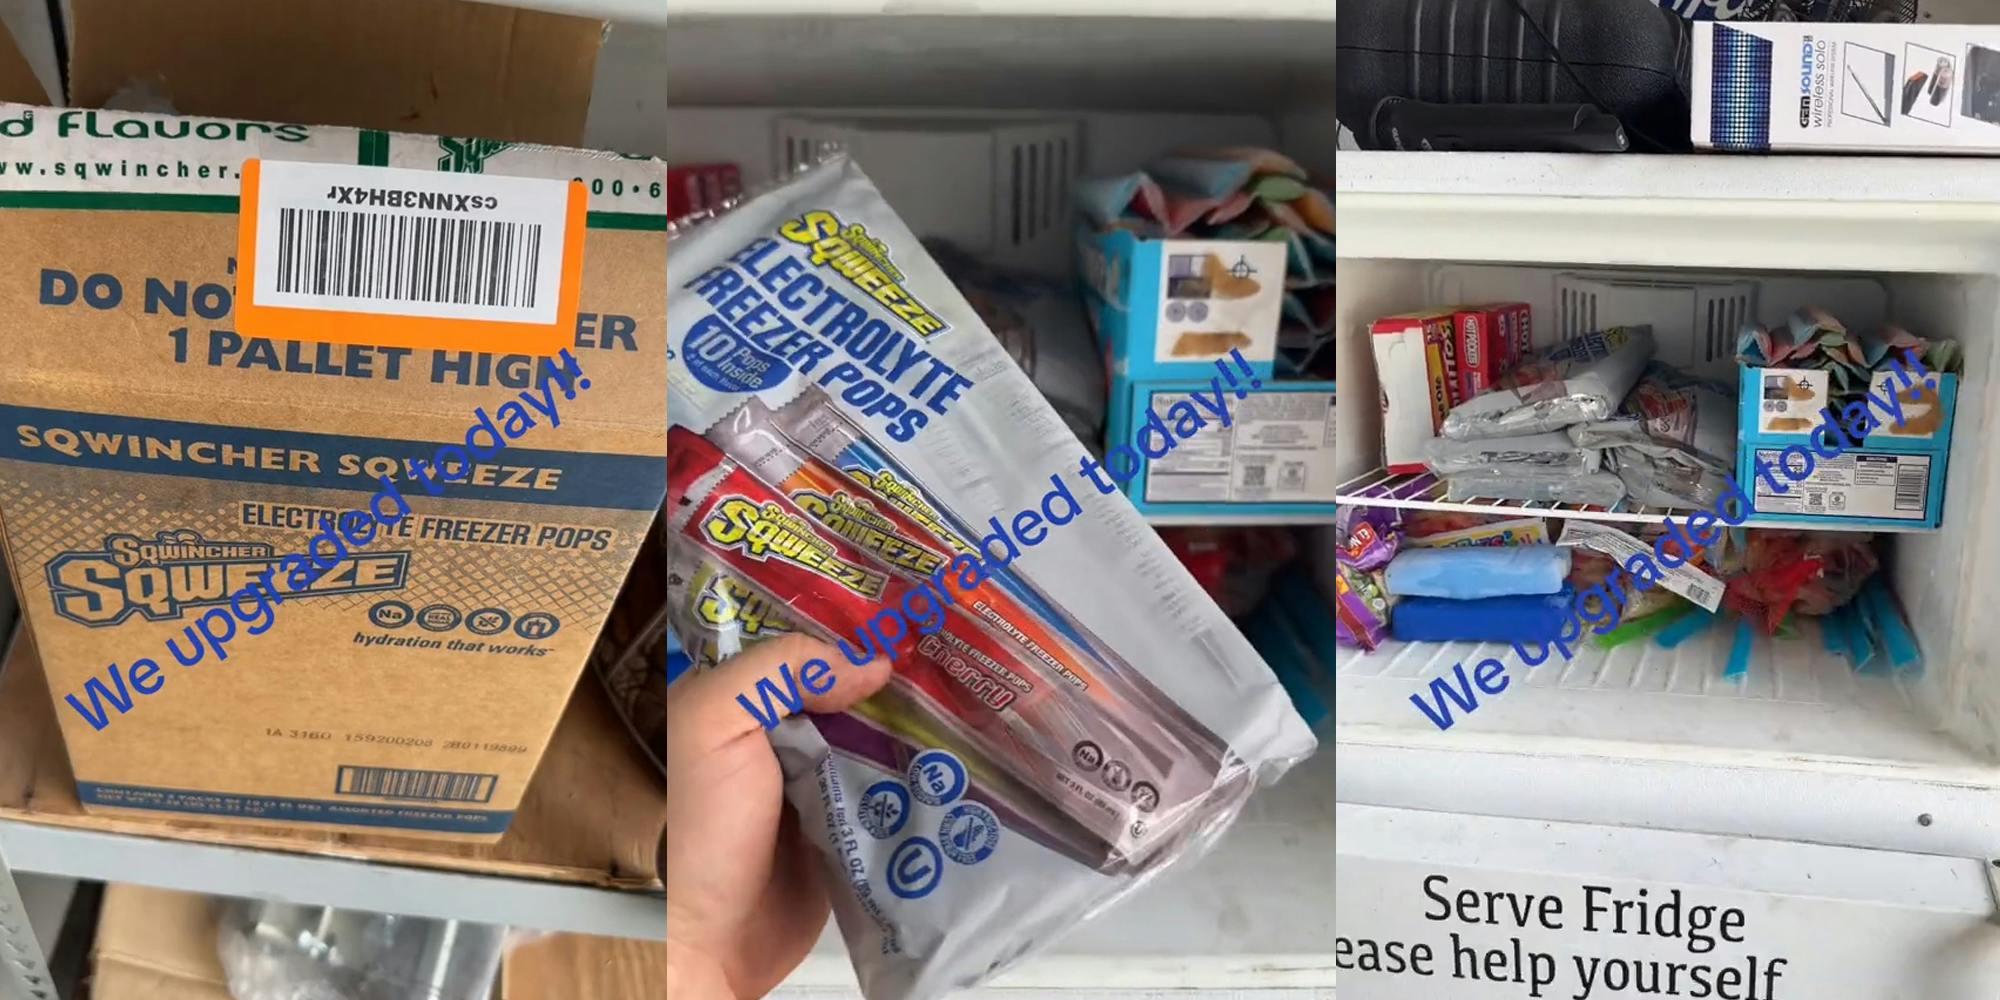 freezer pops in box with caption "We upgraded today!!" (l) freezer pops in hand in front of open freezer with caption "We upgraded today!!" (c) freezer pops in freezer with caption "We upgraded today!!" (r)